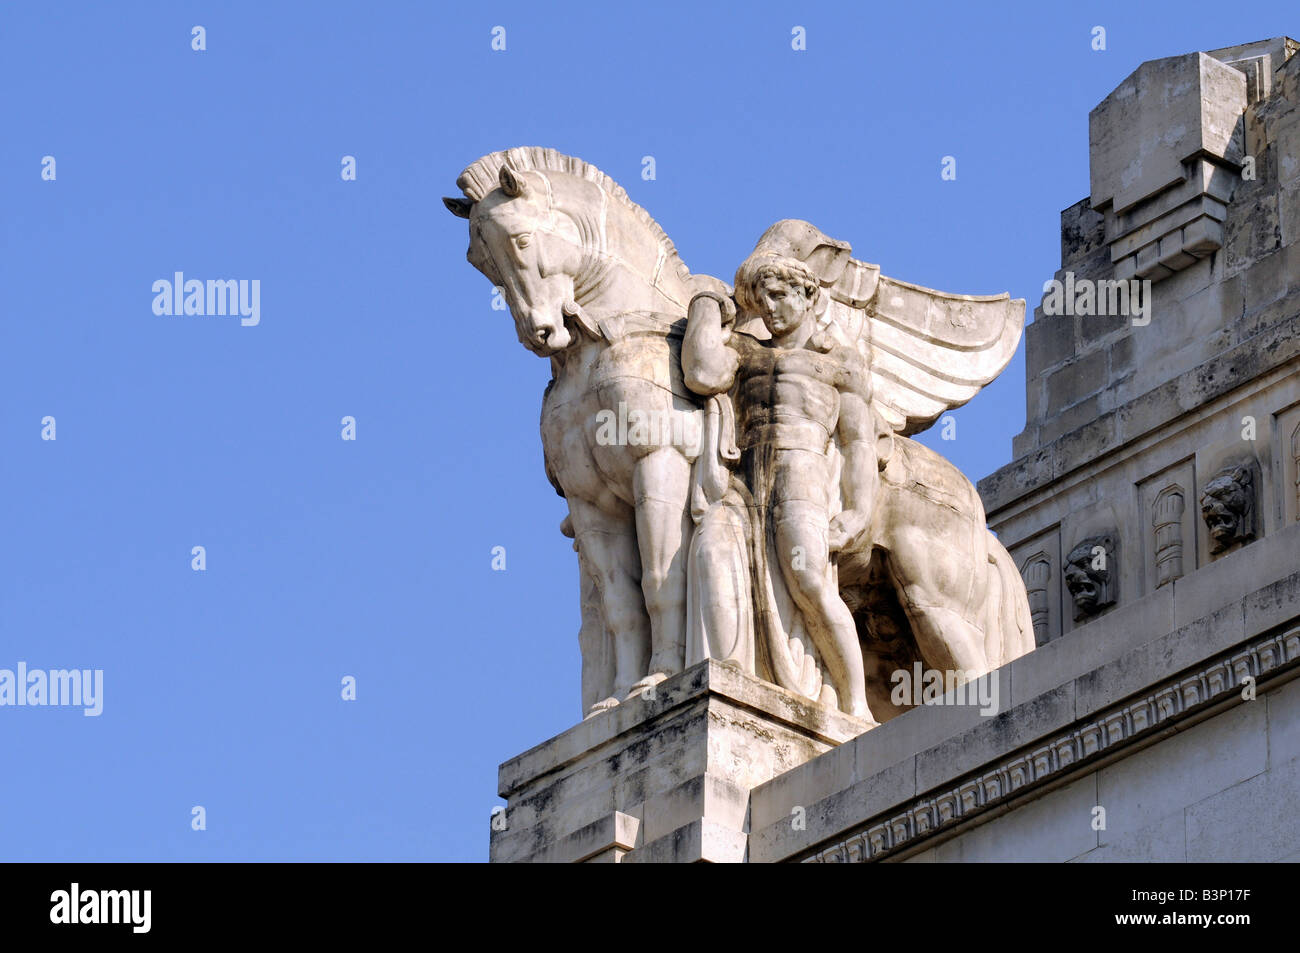 Statue of a horse and a man on the roof of Milan central train station, a masterwork of grand fascist architecture, in Italy. Stock Photo